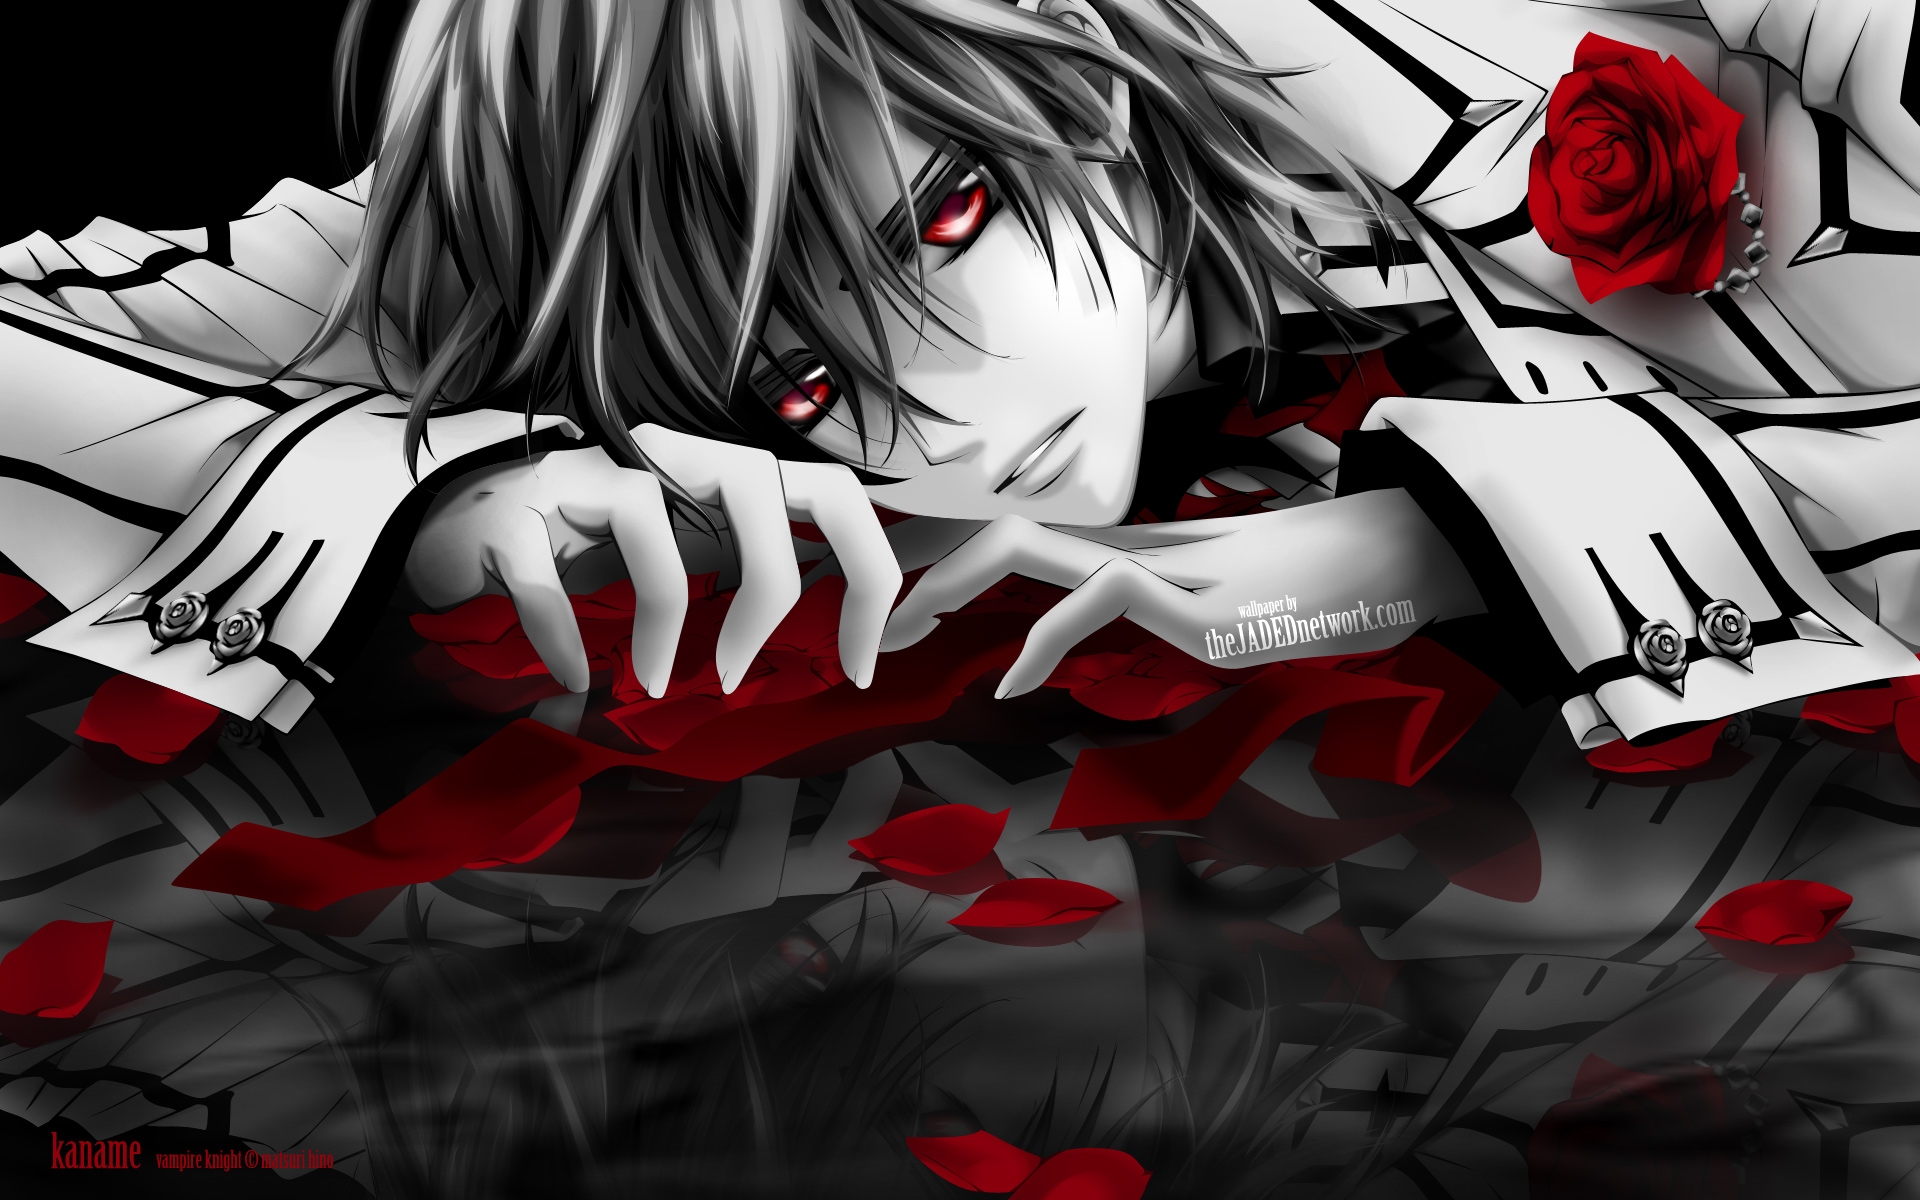 Sad Anime Boy with Red Roses